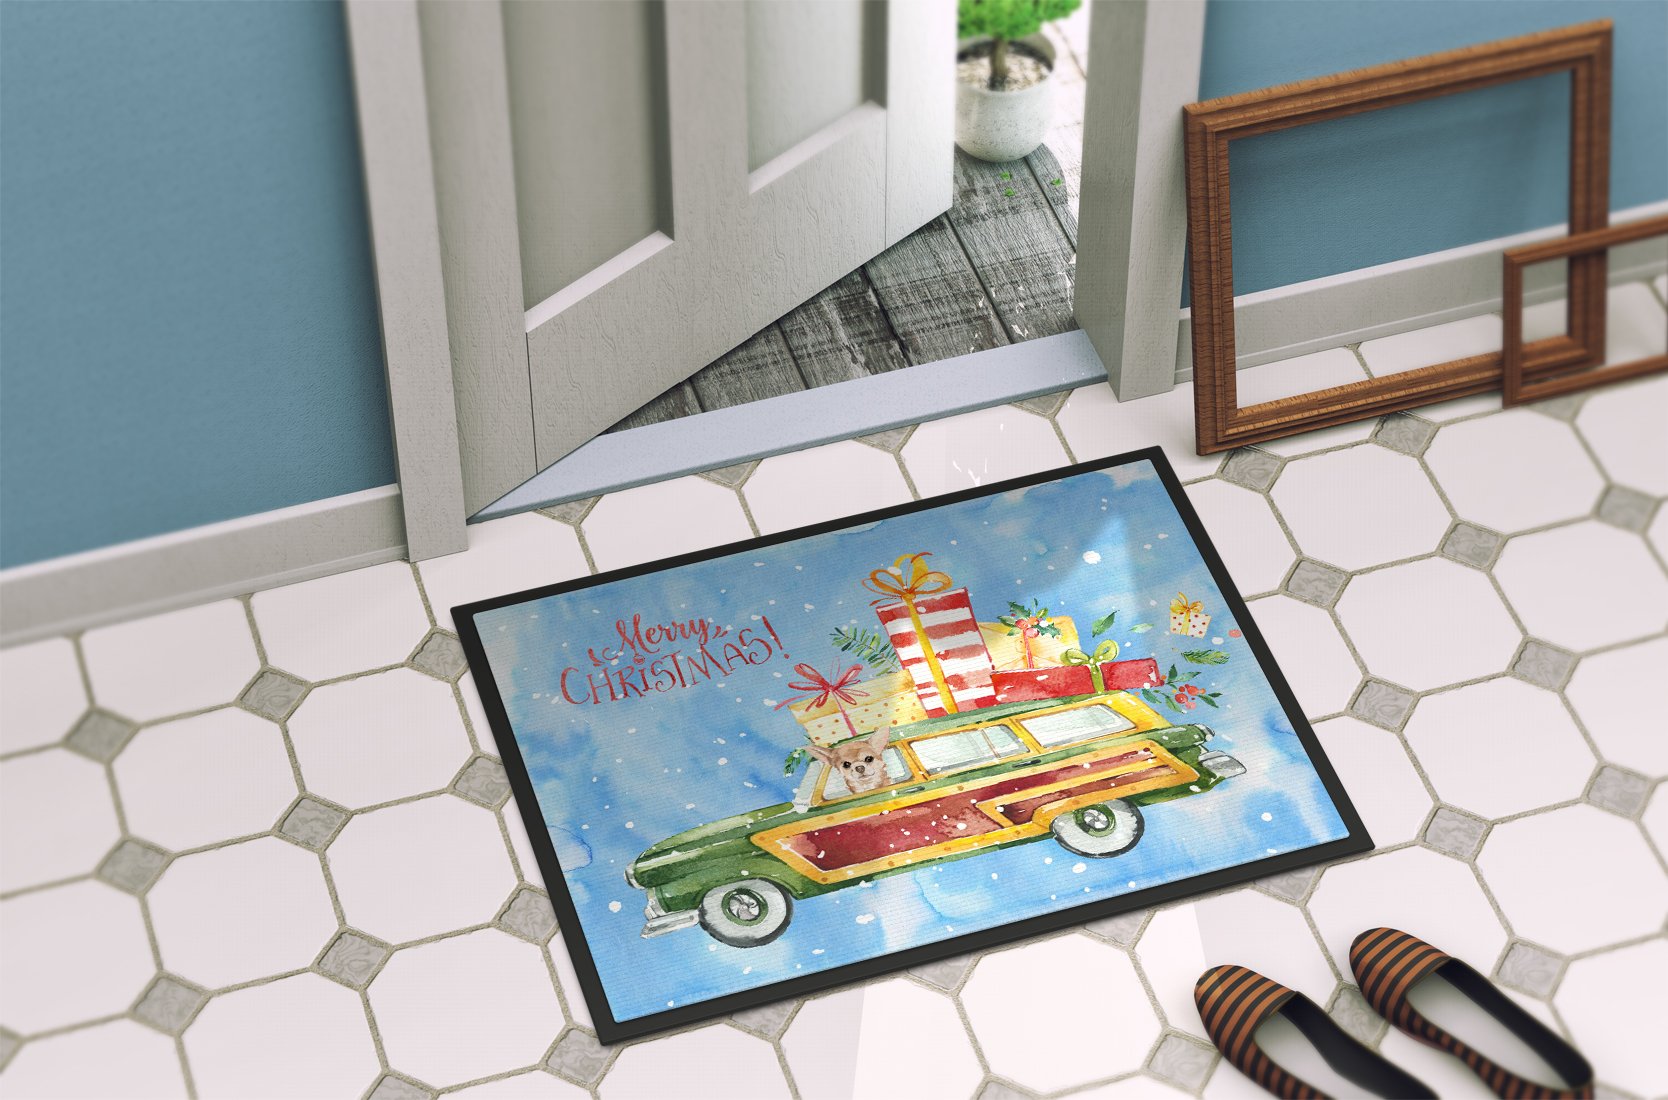 Merry Christmas Chihuahua Indoor or Outdoor Mat 24x36 CK2449JMAT by Caroline's Treasures